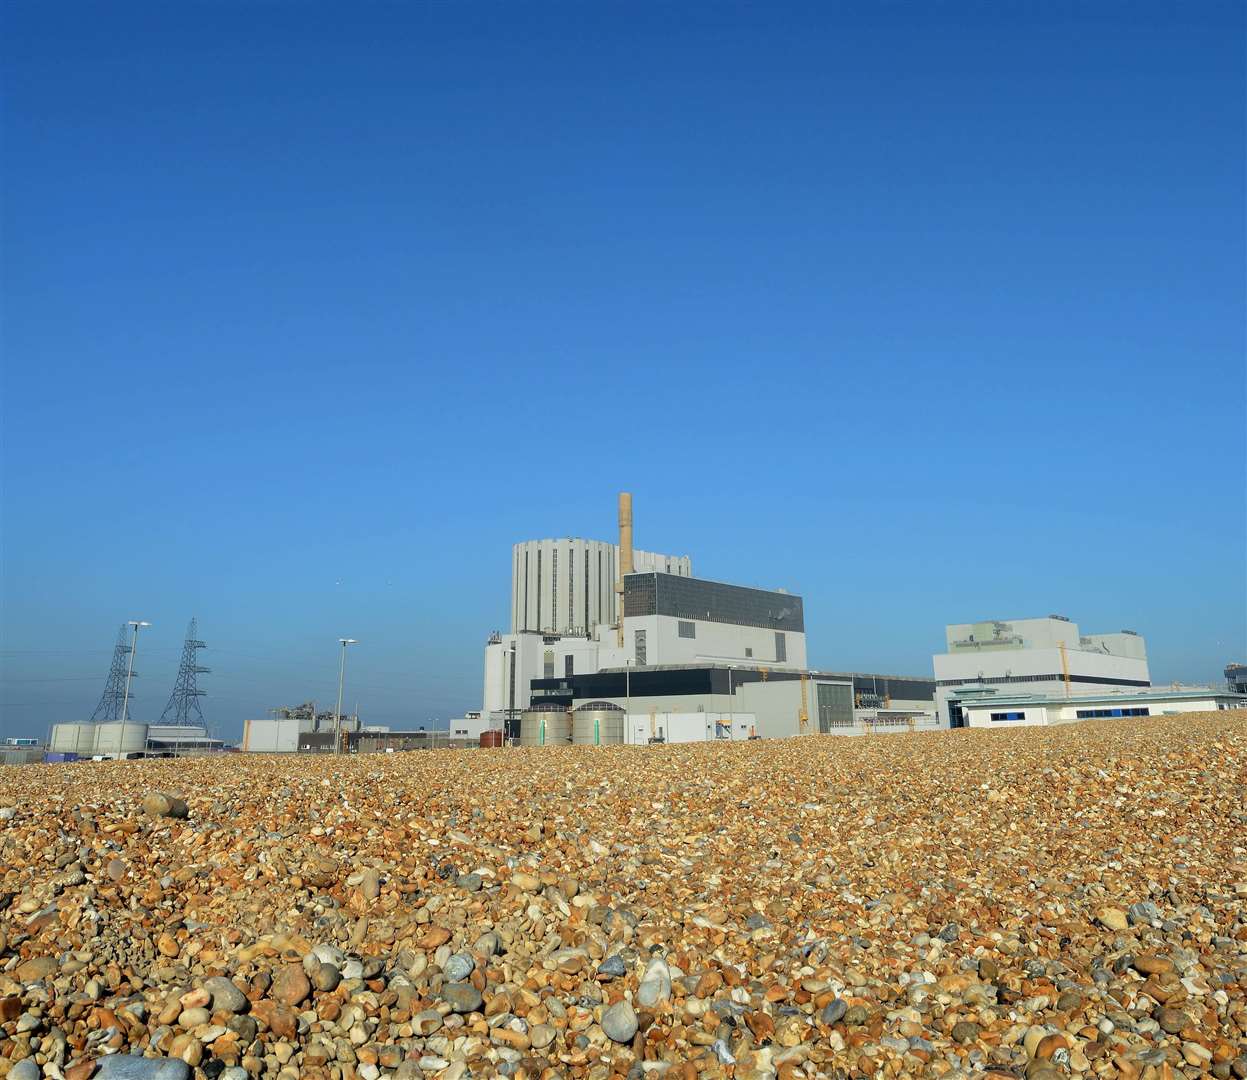 Dungeness B power station is facing an 'uncertain' future